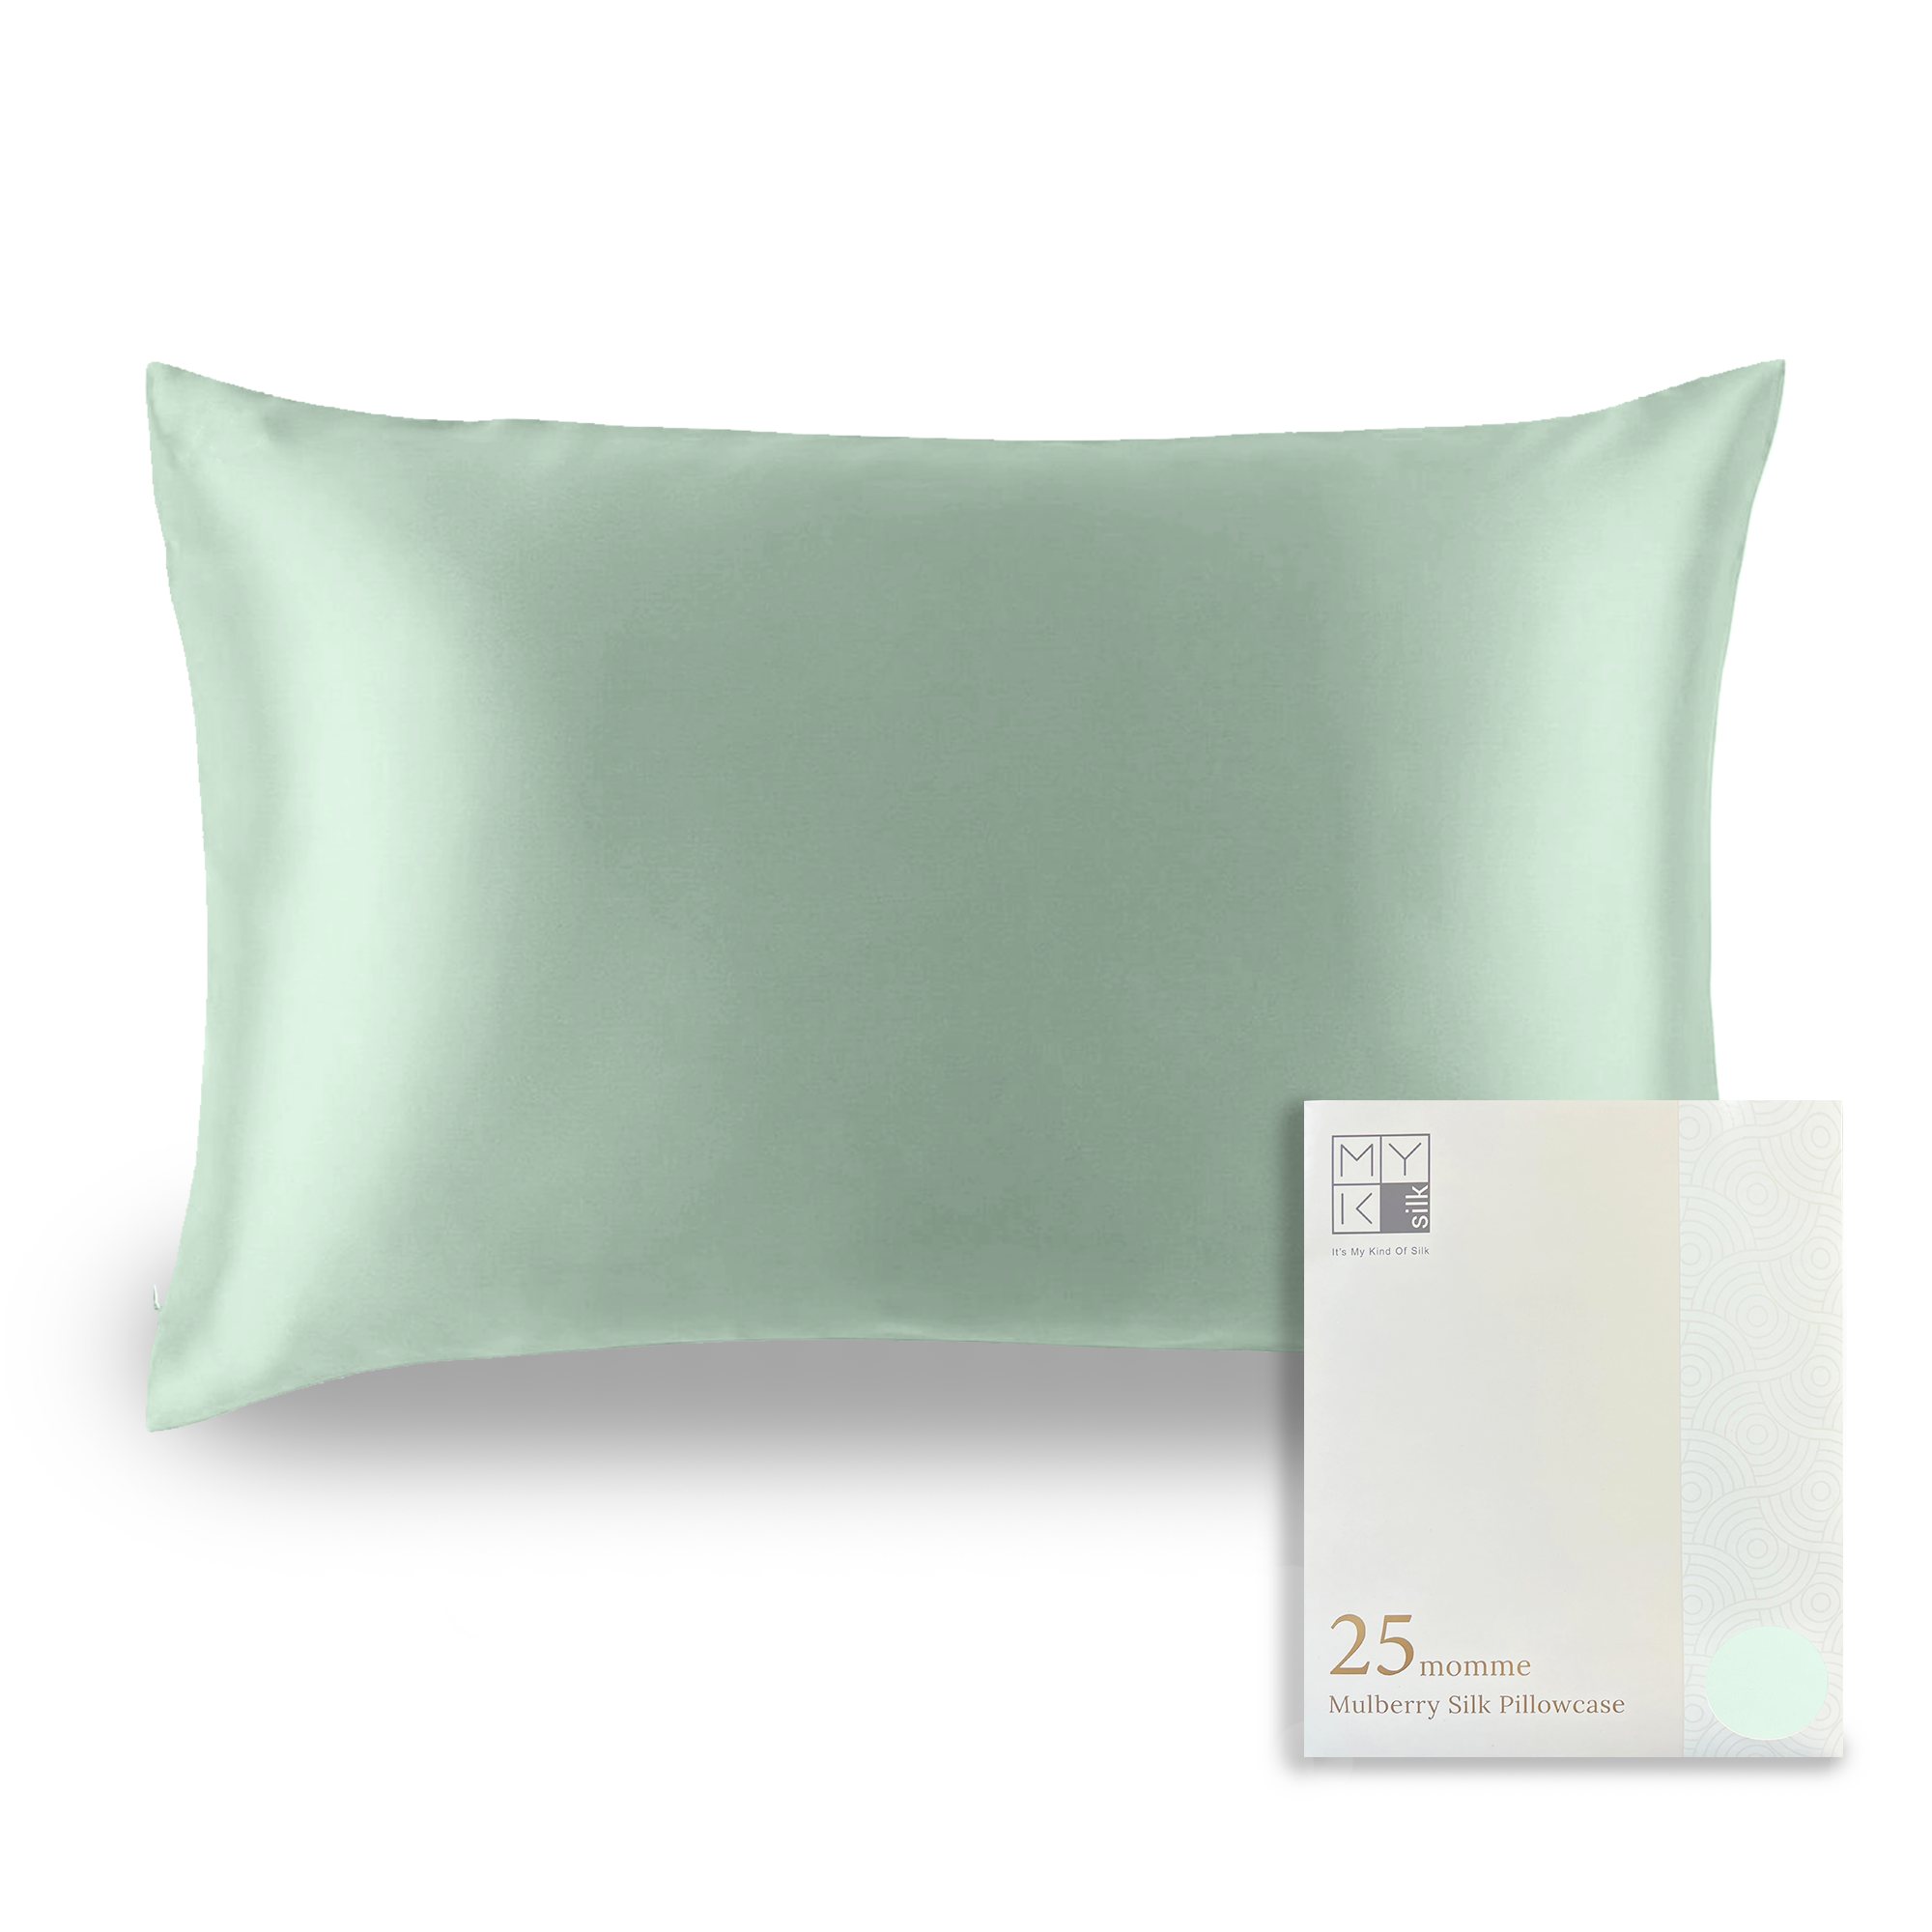 Products Luxury Mulberry Silk Pillowcase (25 momme) - MYK Silk #color_green